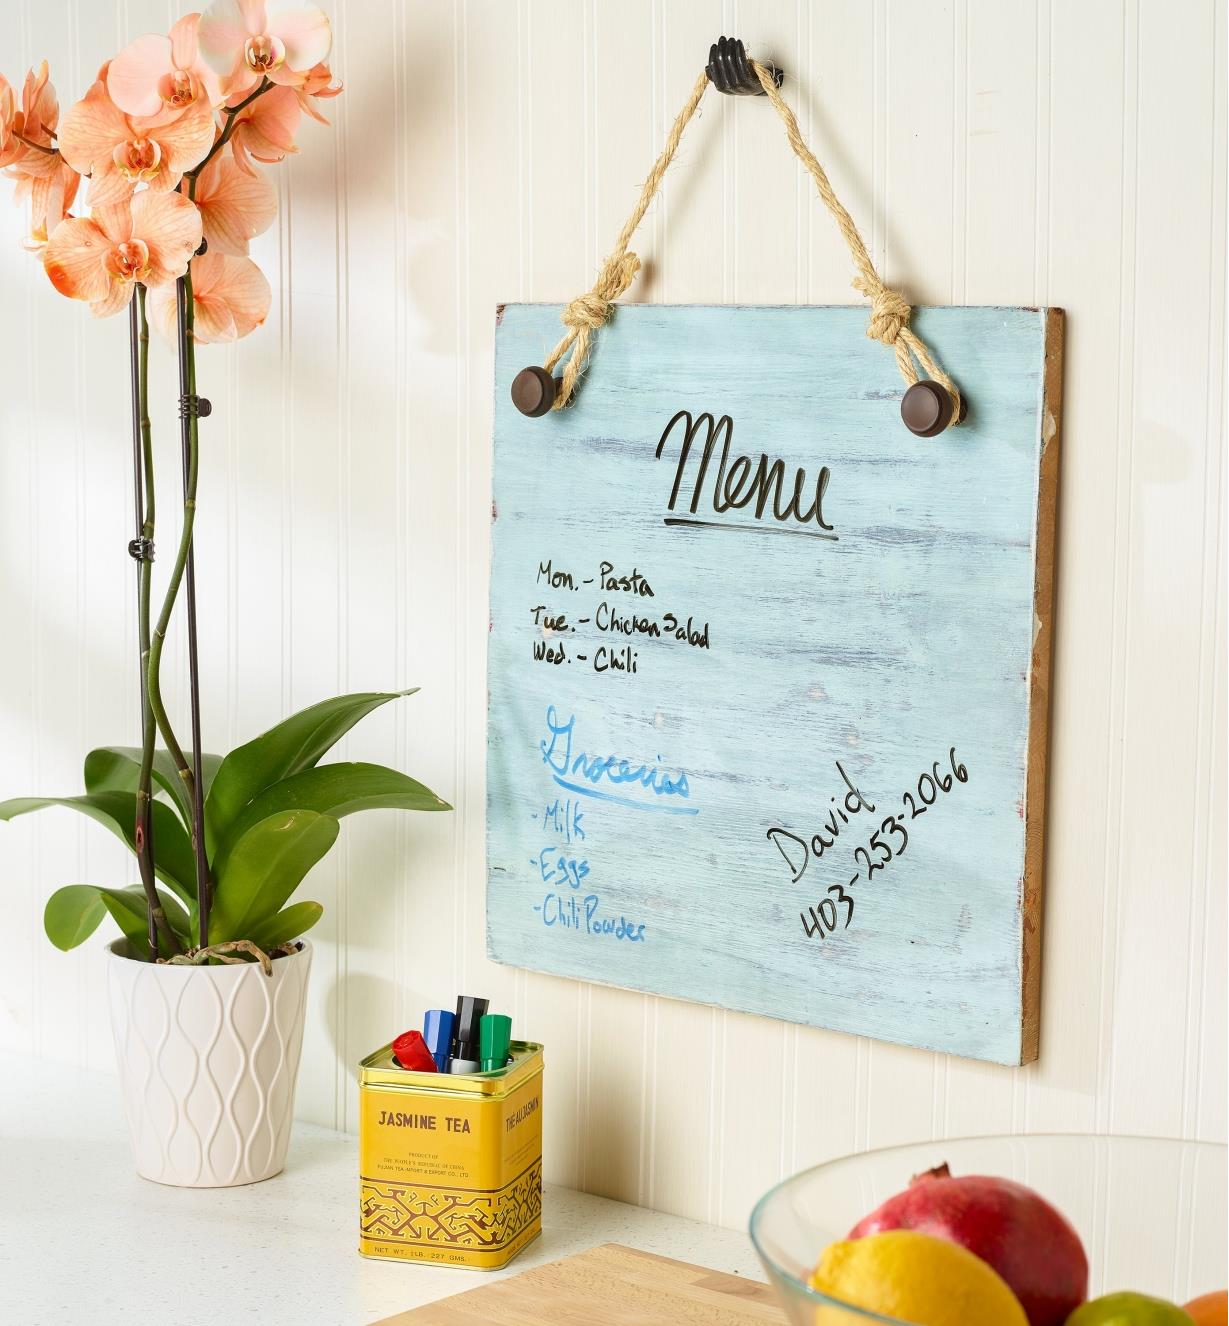 A hanging memo board created using the dry-erase surface kit 